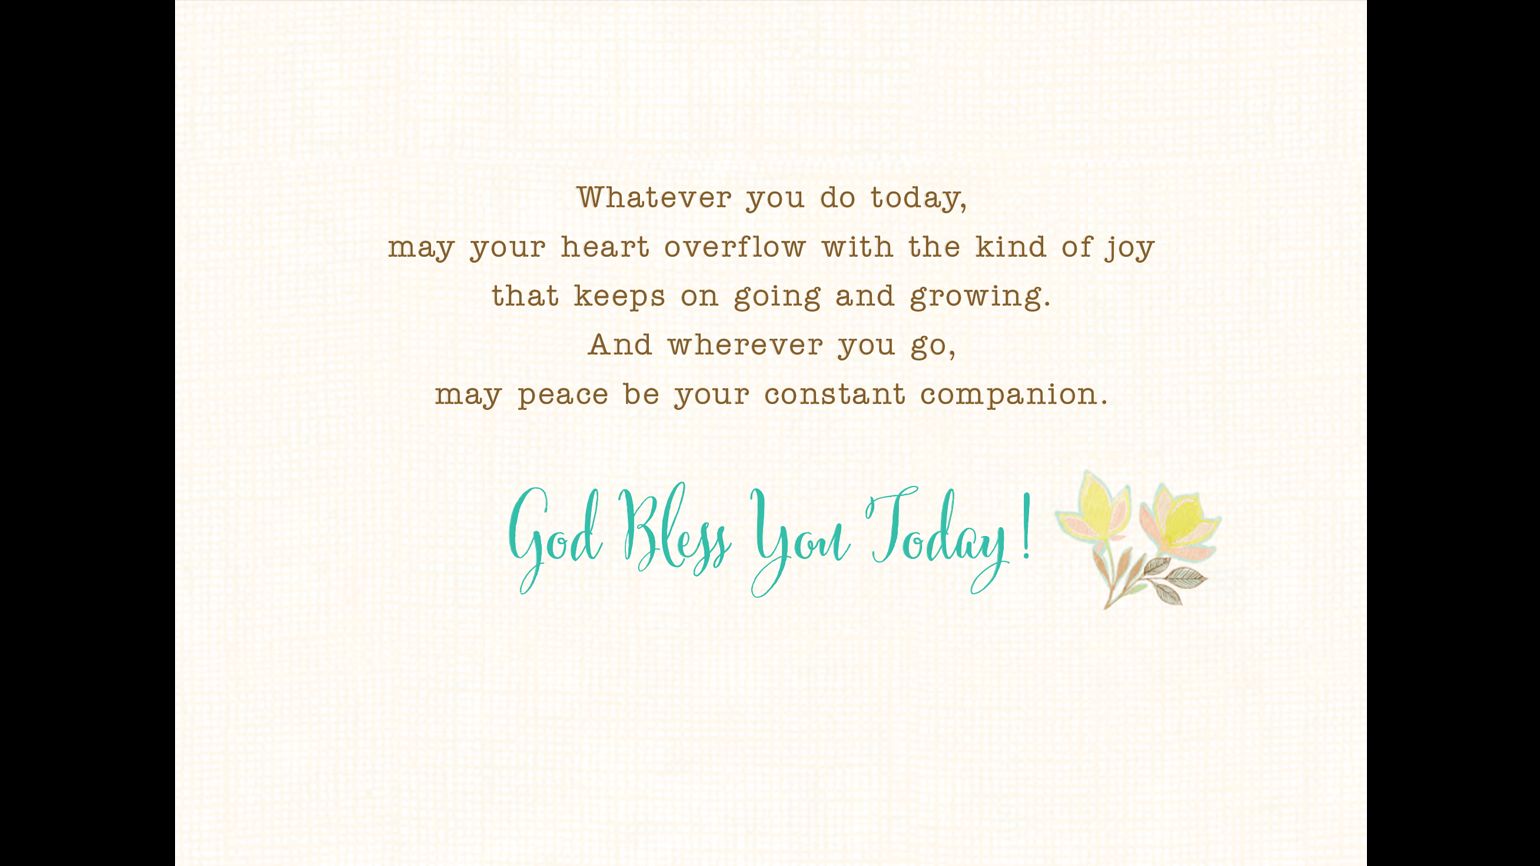 "Whatever you do today, may your heart overflow with the kind of joy that keeps on going and growing. And wherever you go, may peace be your constant companion. God Bless You Today!"